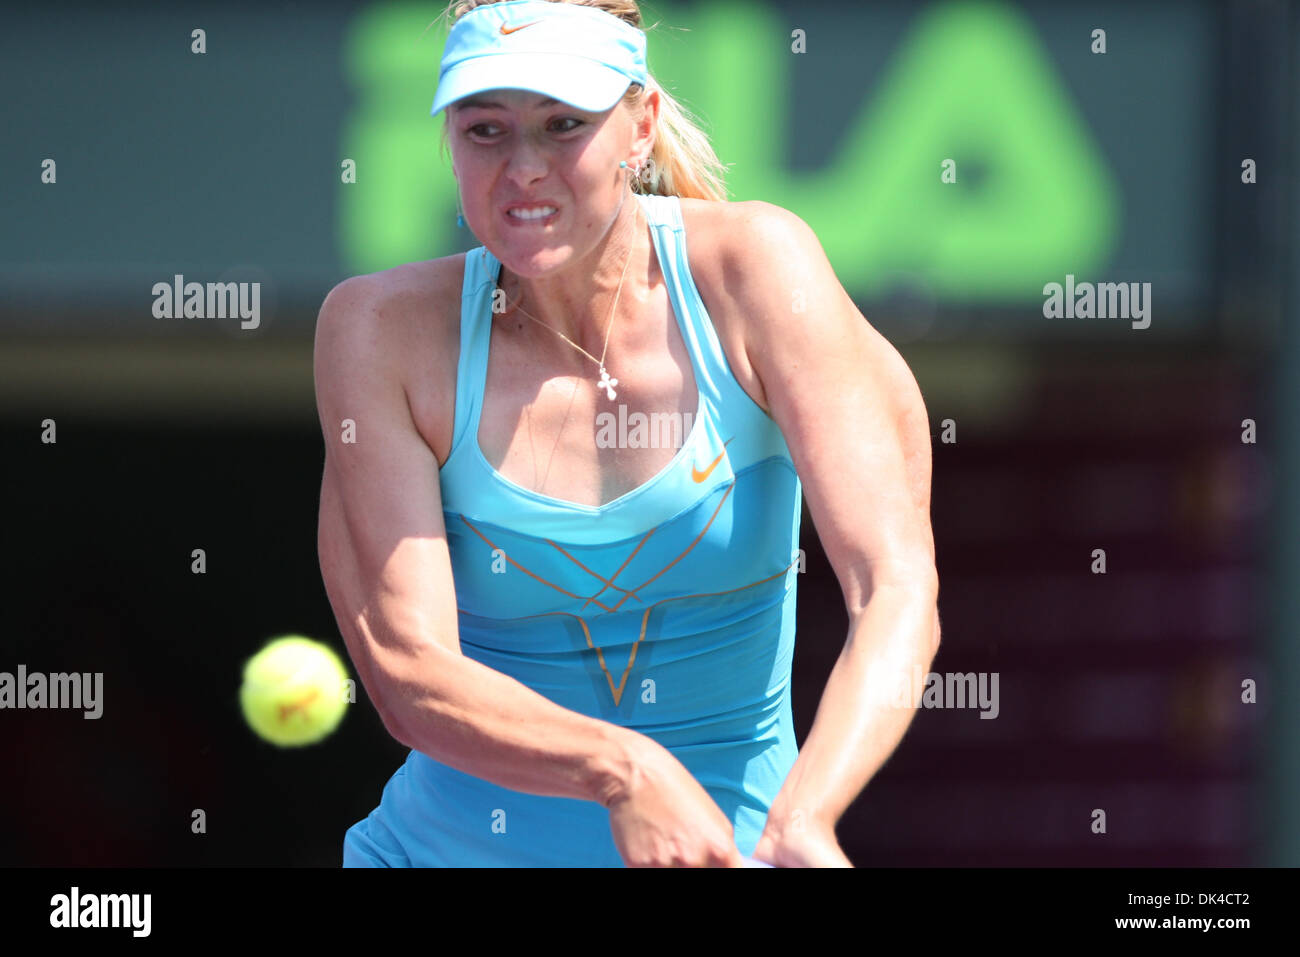 Mar. 31, 2011 - Kay Biscayne, Florida, U.S - Russia's MARIA SHARAPOVA reached her first final in seven months with a 3-6 6-0 6-2 victory over Germany's Petkovic at the Sony Ericsson Open. (Credit Image: © Luis Blanco/Southcreek Global/ZUMApress.com) Stock Photo